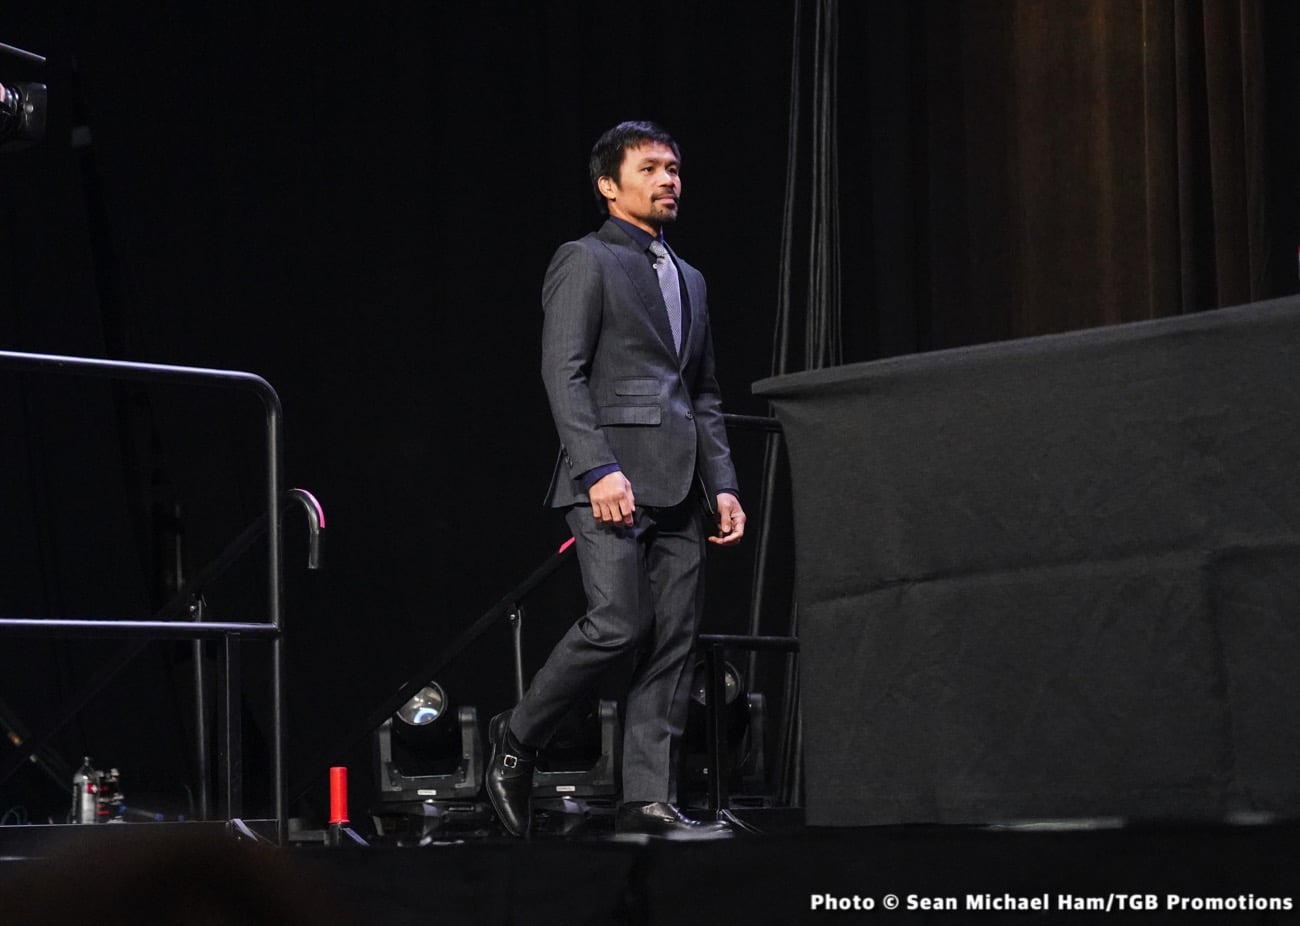 Image: Manny Pacquiao asked if he'd fight Canelo Alvarez or Crawford